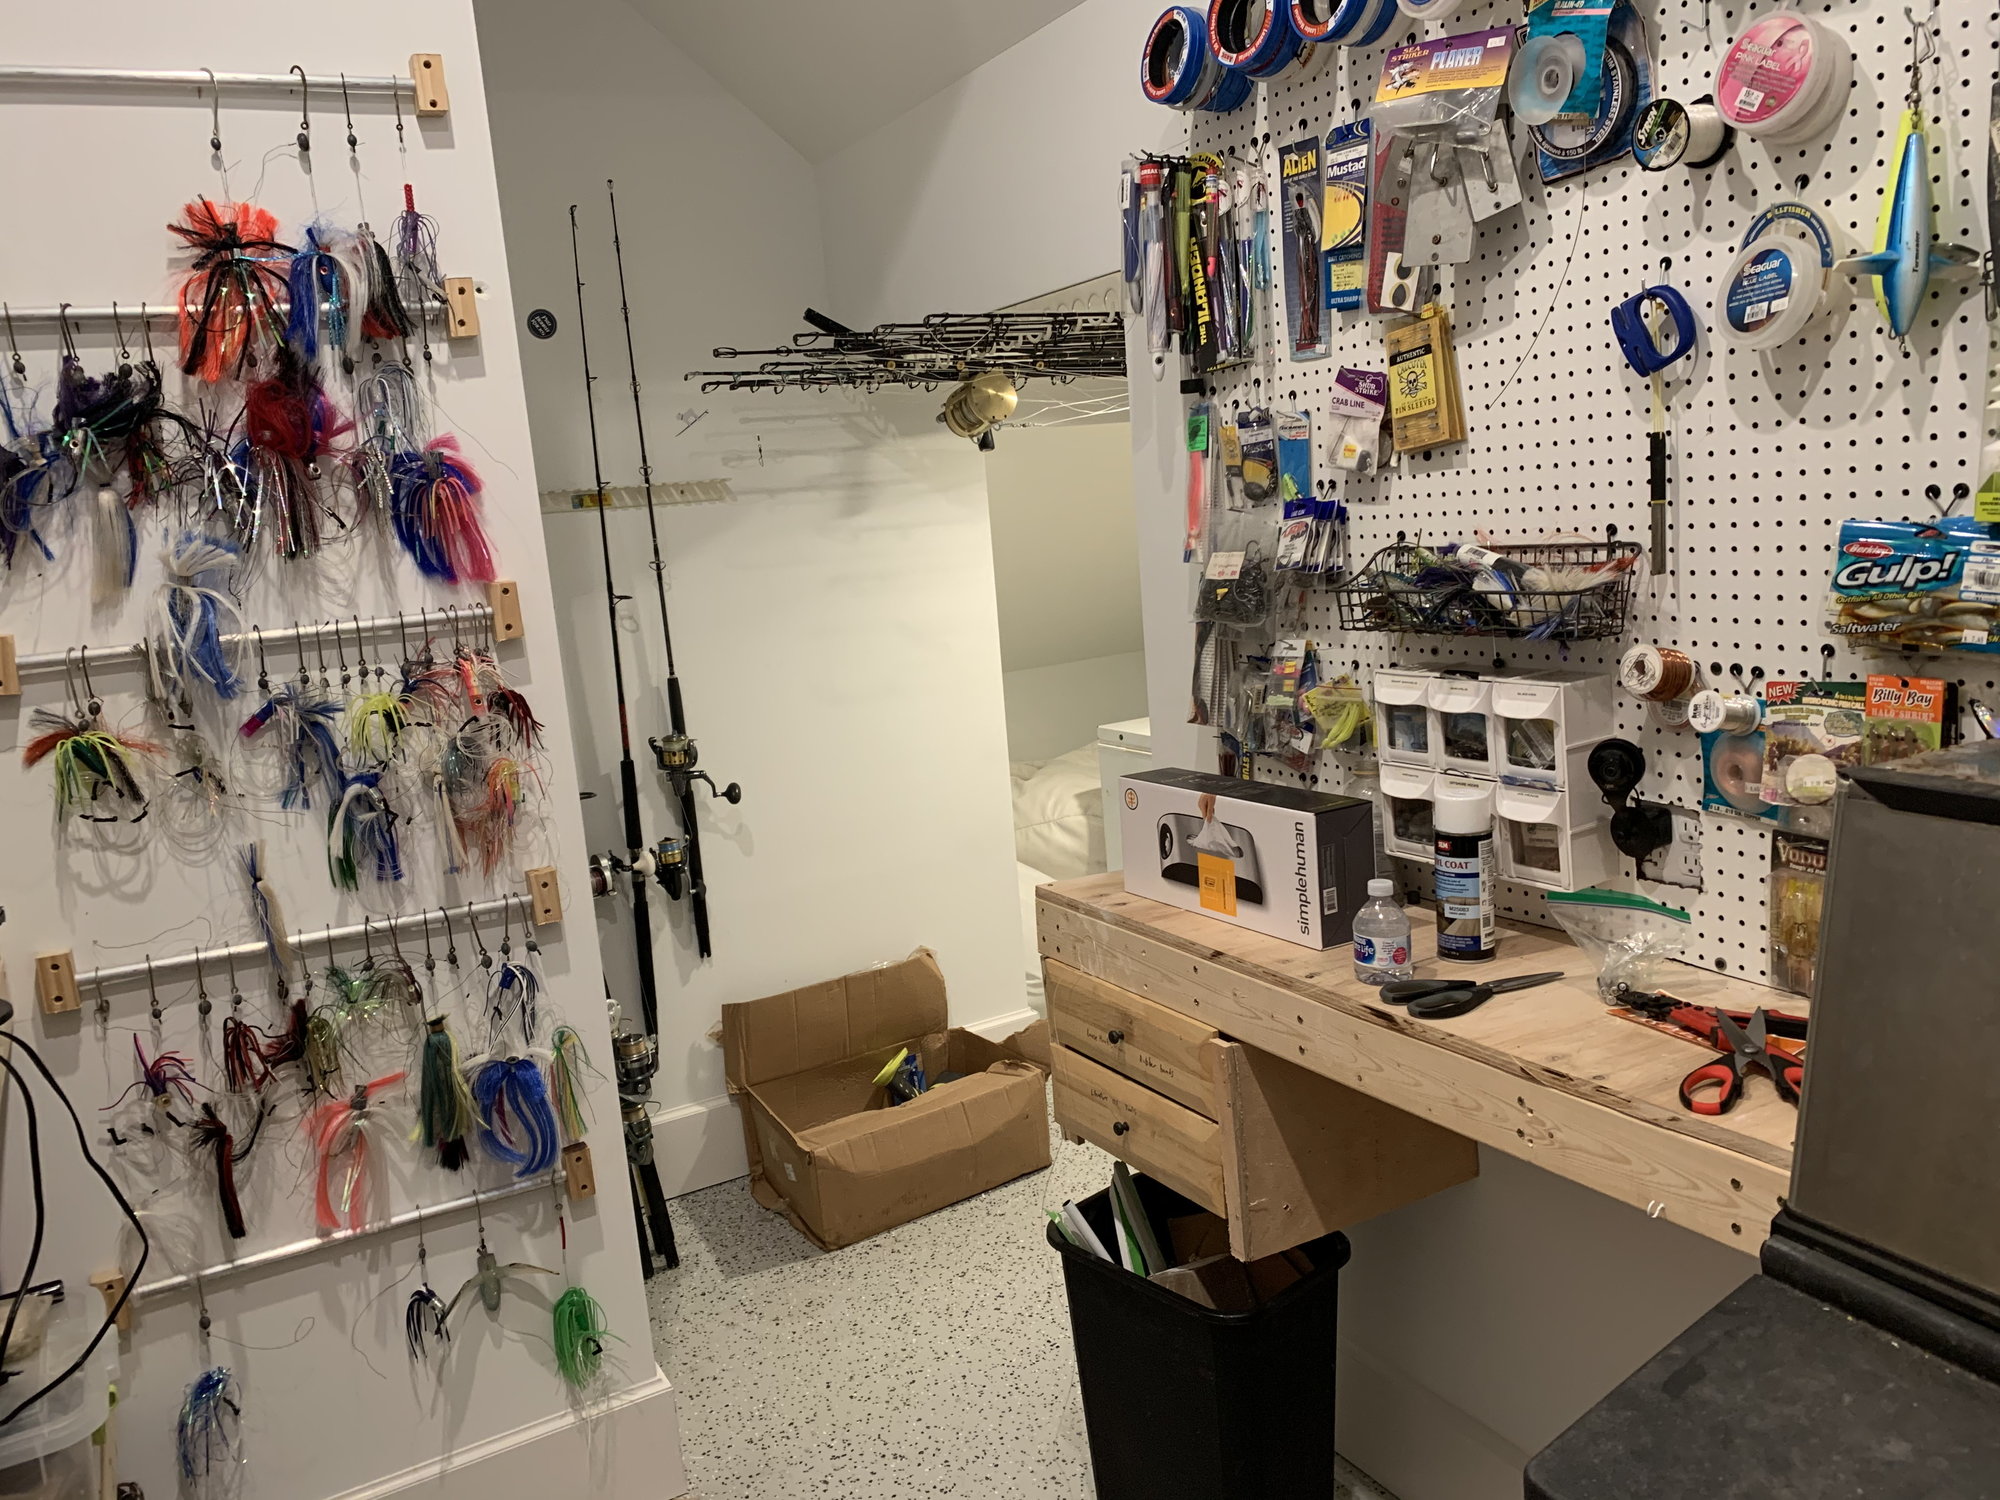 Tackle room/storage photos and ideas - The Hull Truth - Boating and Fishing  Forum